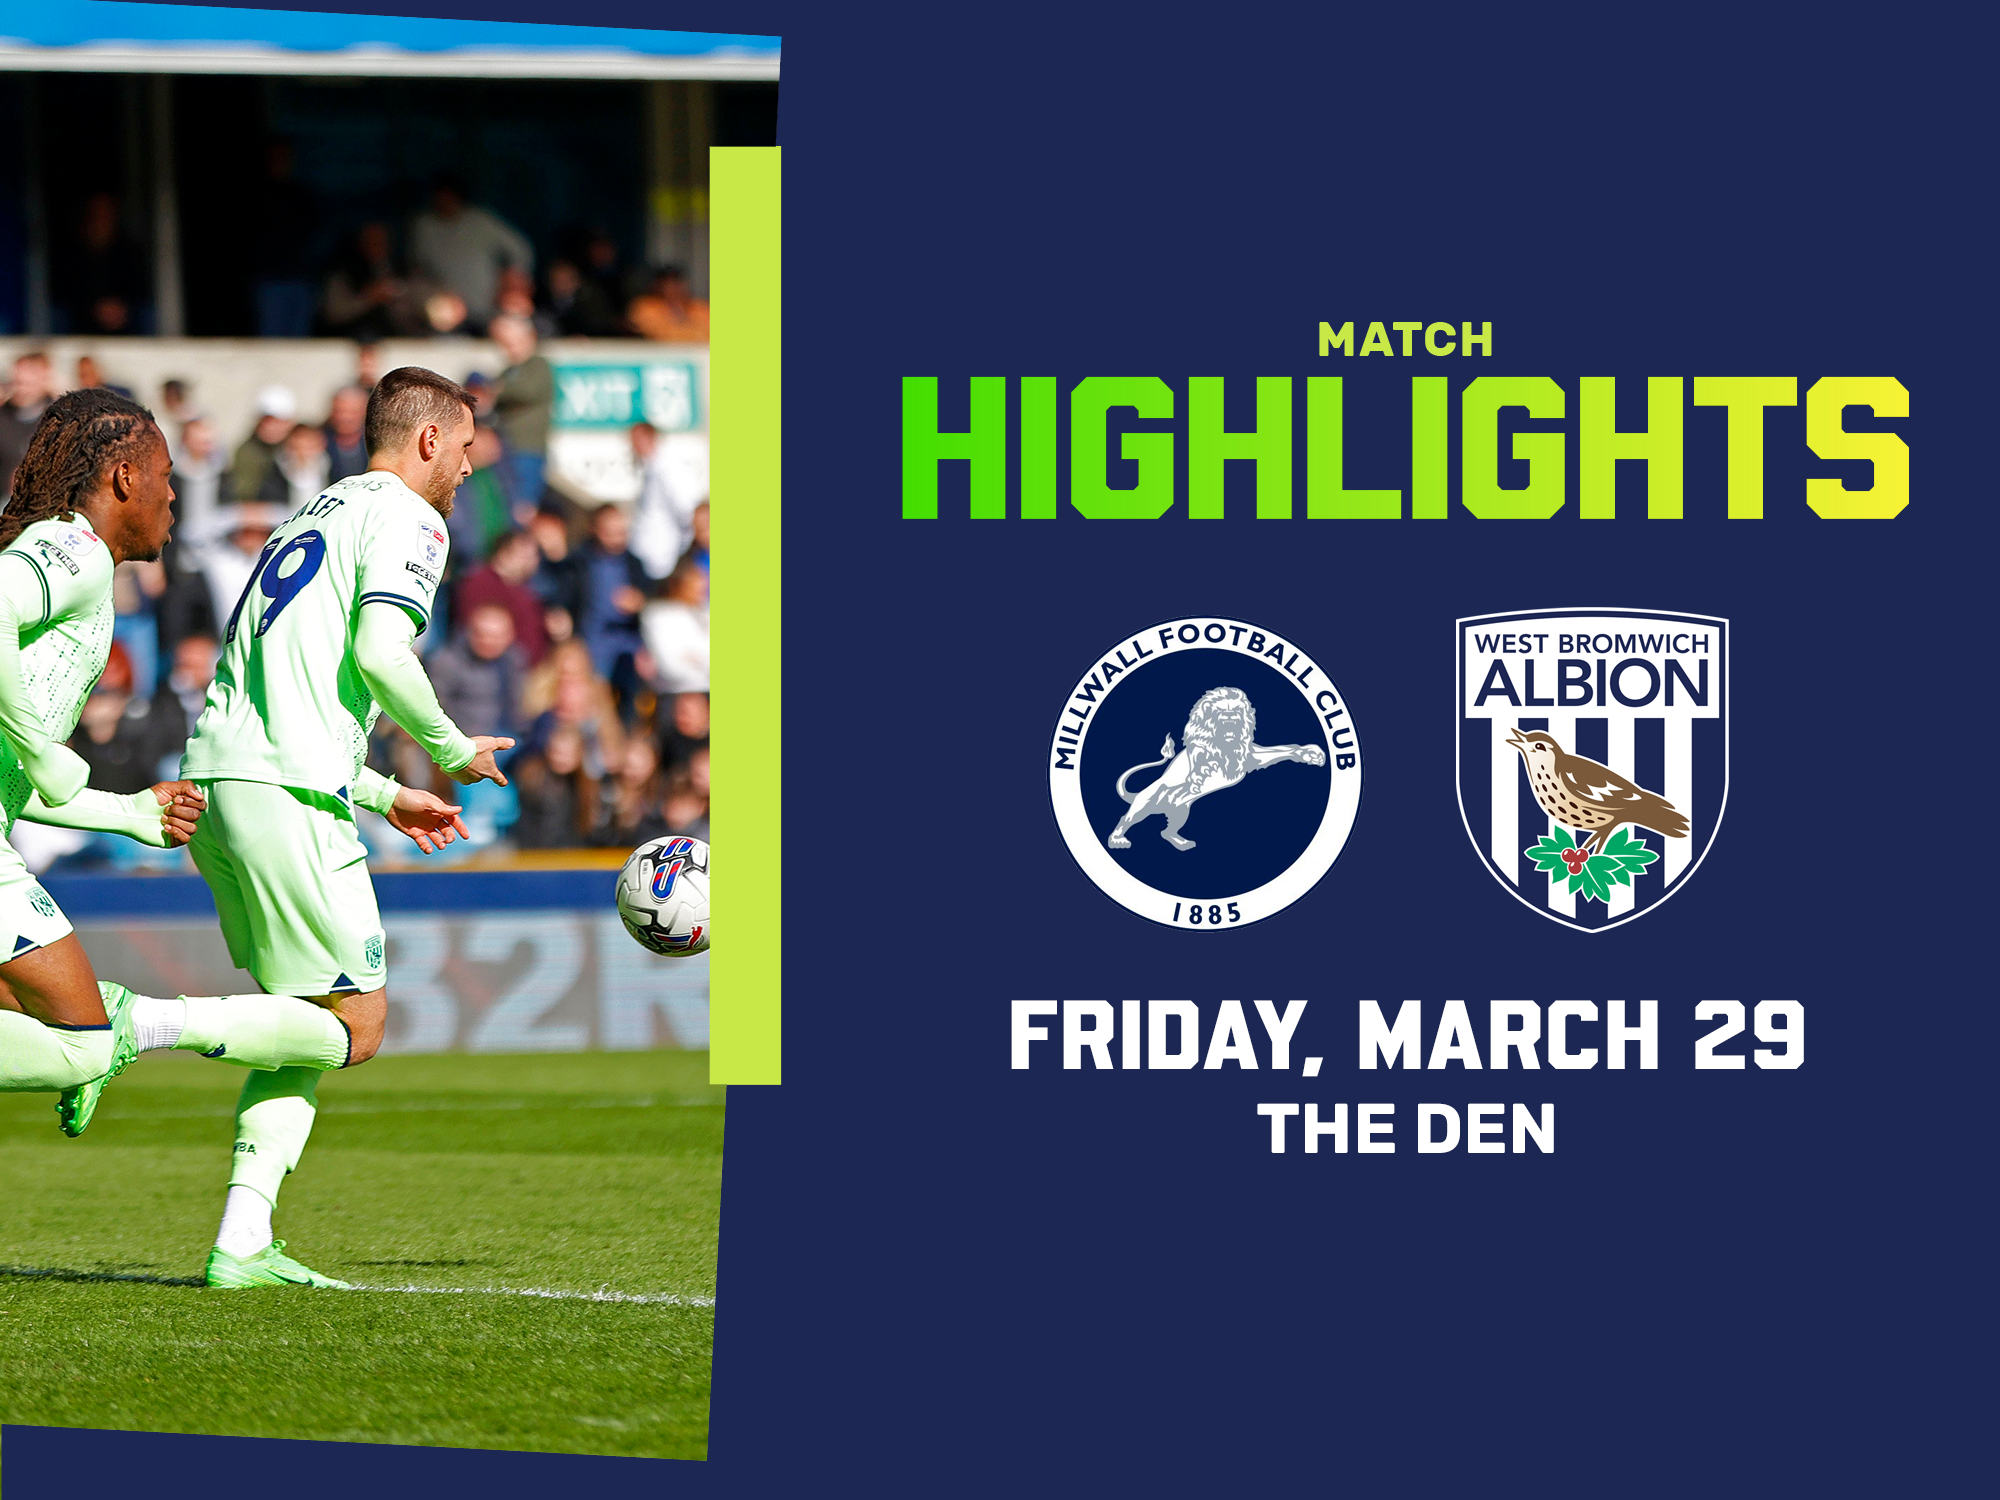 A match highlights photo graphic, showing the club crests of Millwall and Albion, and an action shot of John Swift in the green 23/24 away kit